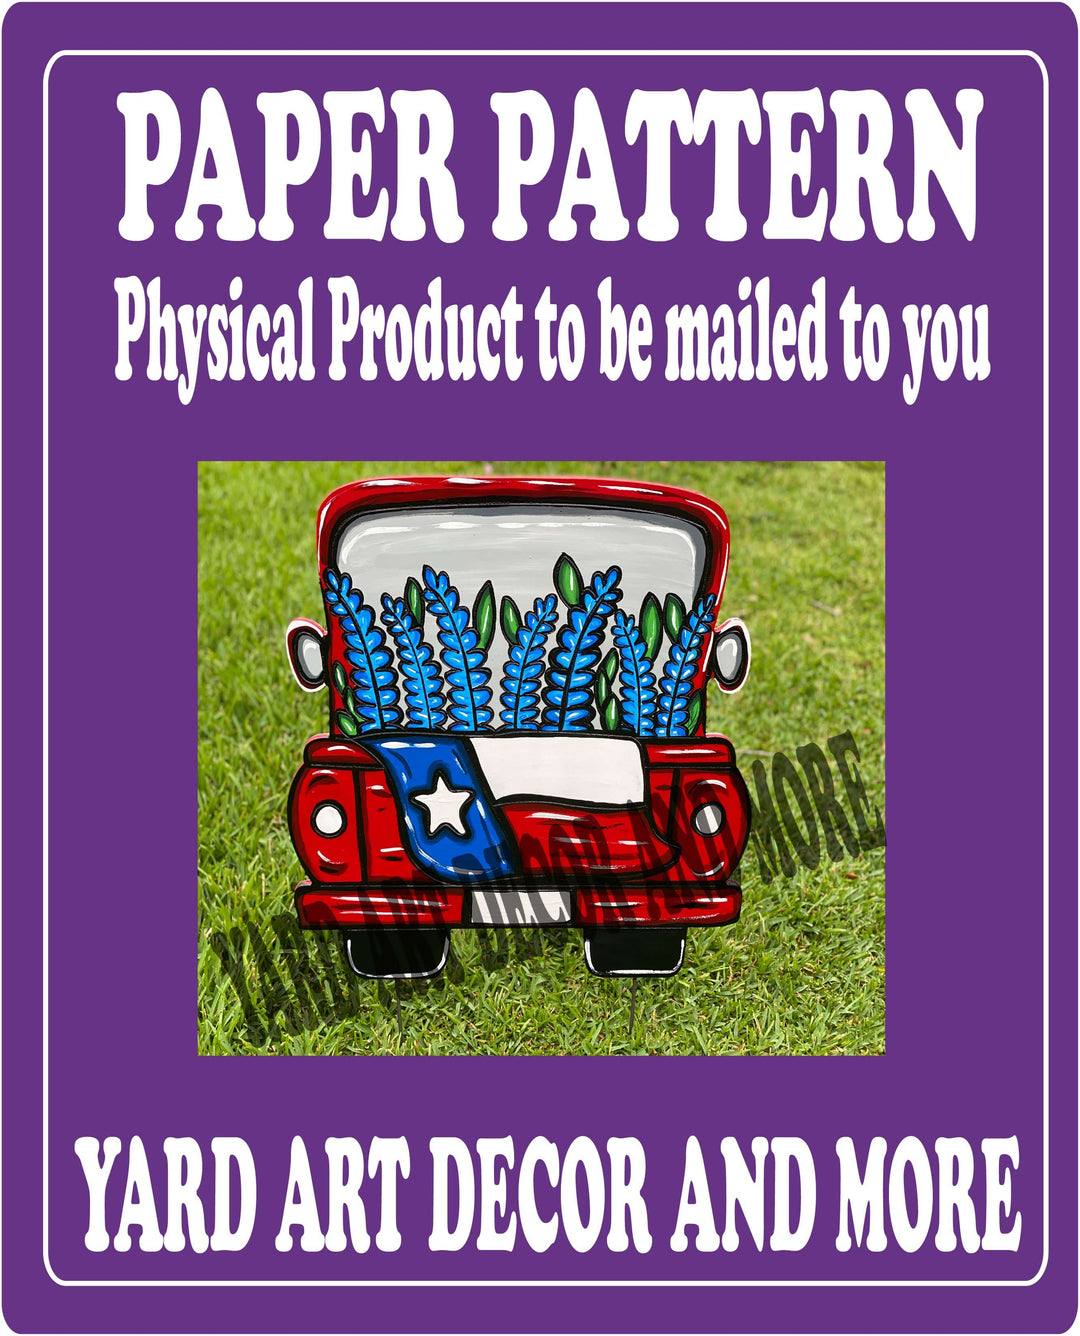 Red Truck with State of Texas Flag Paper Pattern Yard Art Decor